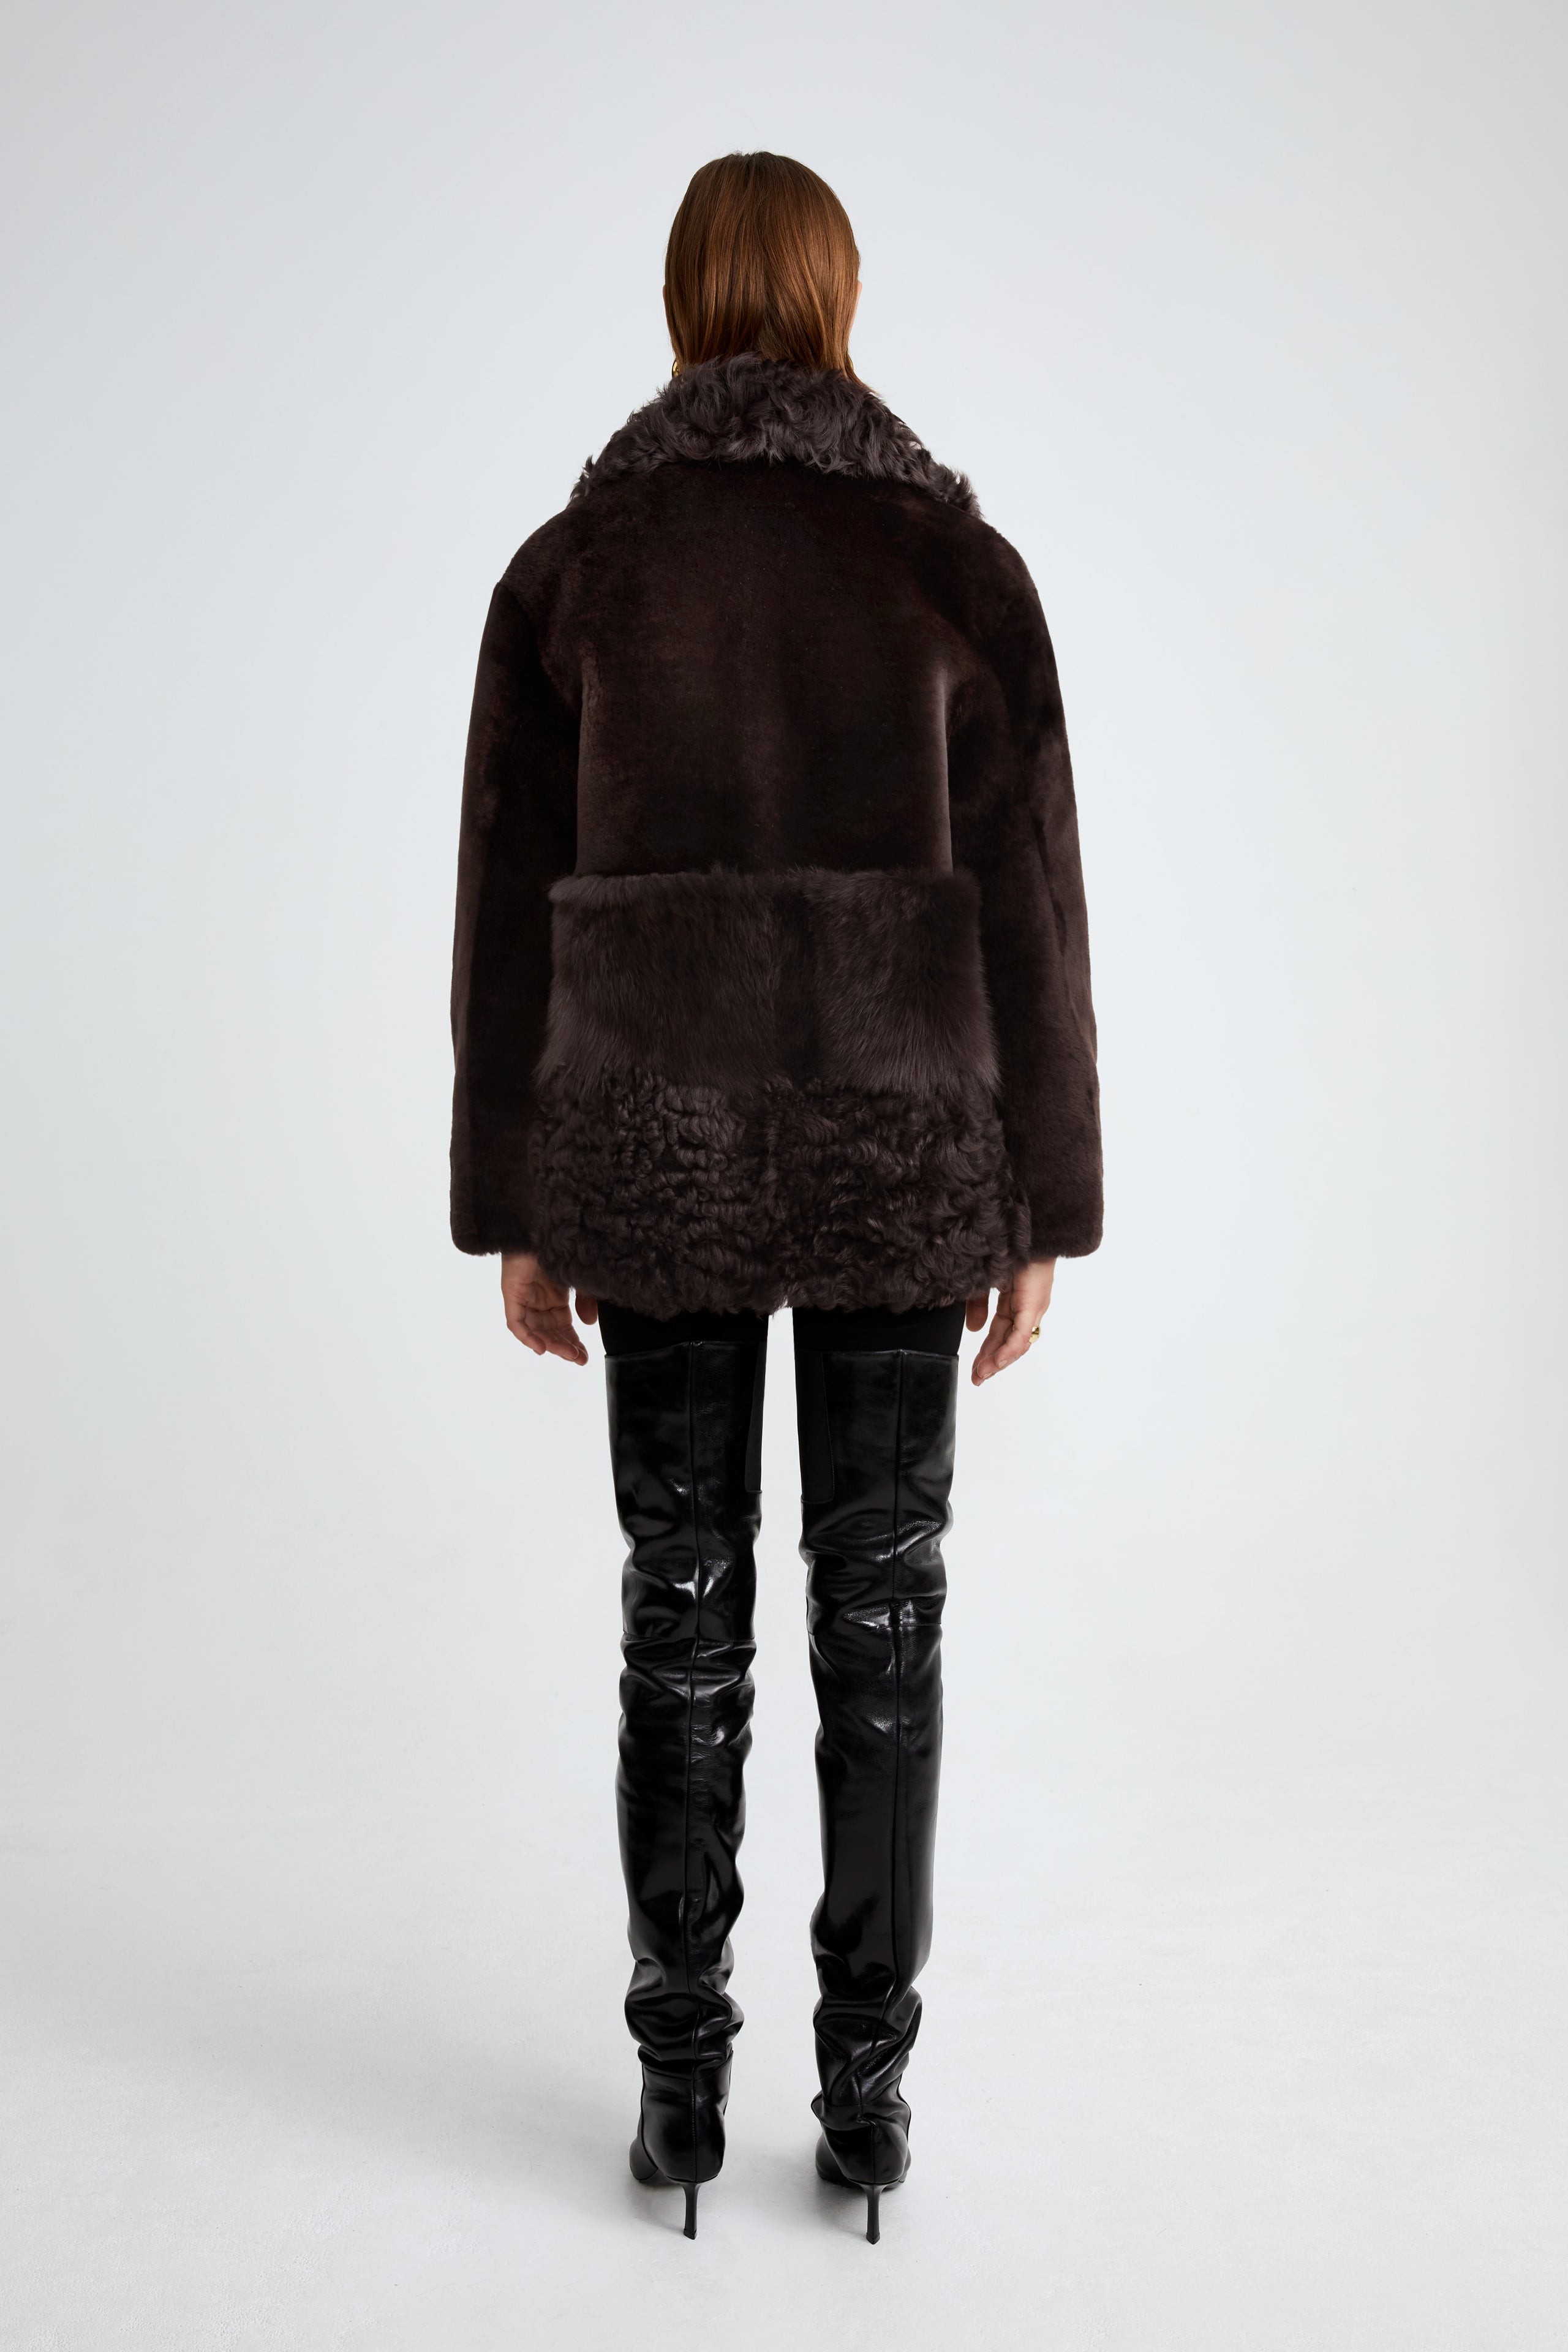 Model is wearing the Anouk Dark Chocolate Luxurious Shearling Coat Back